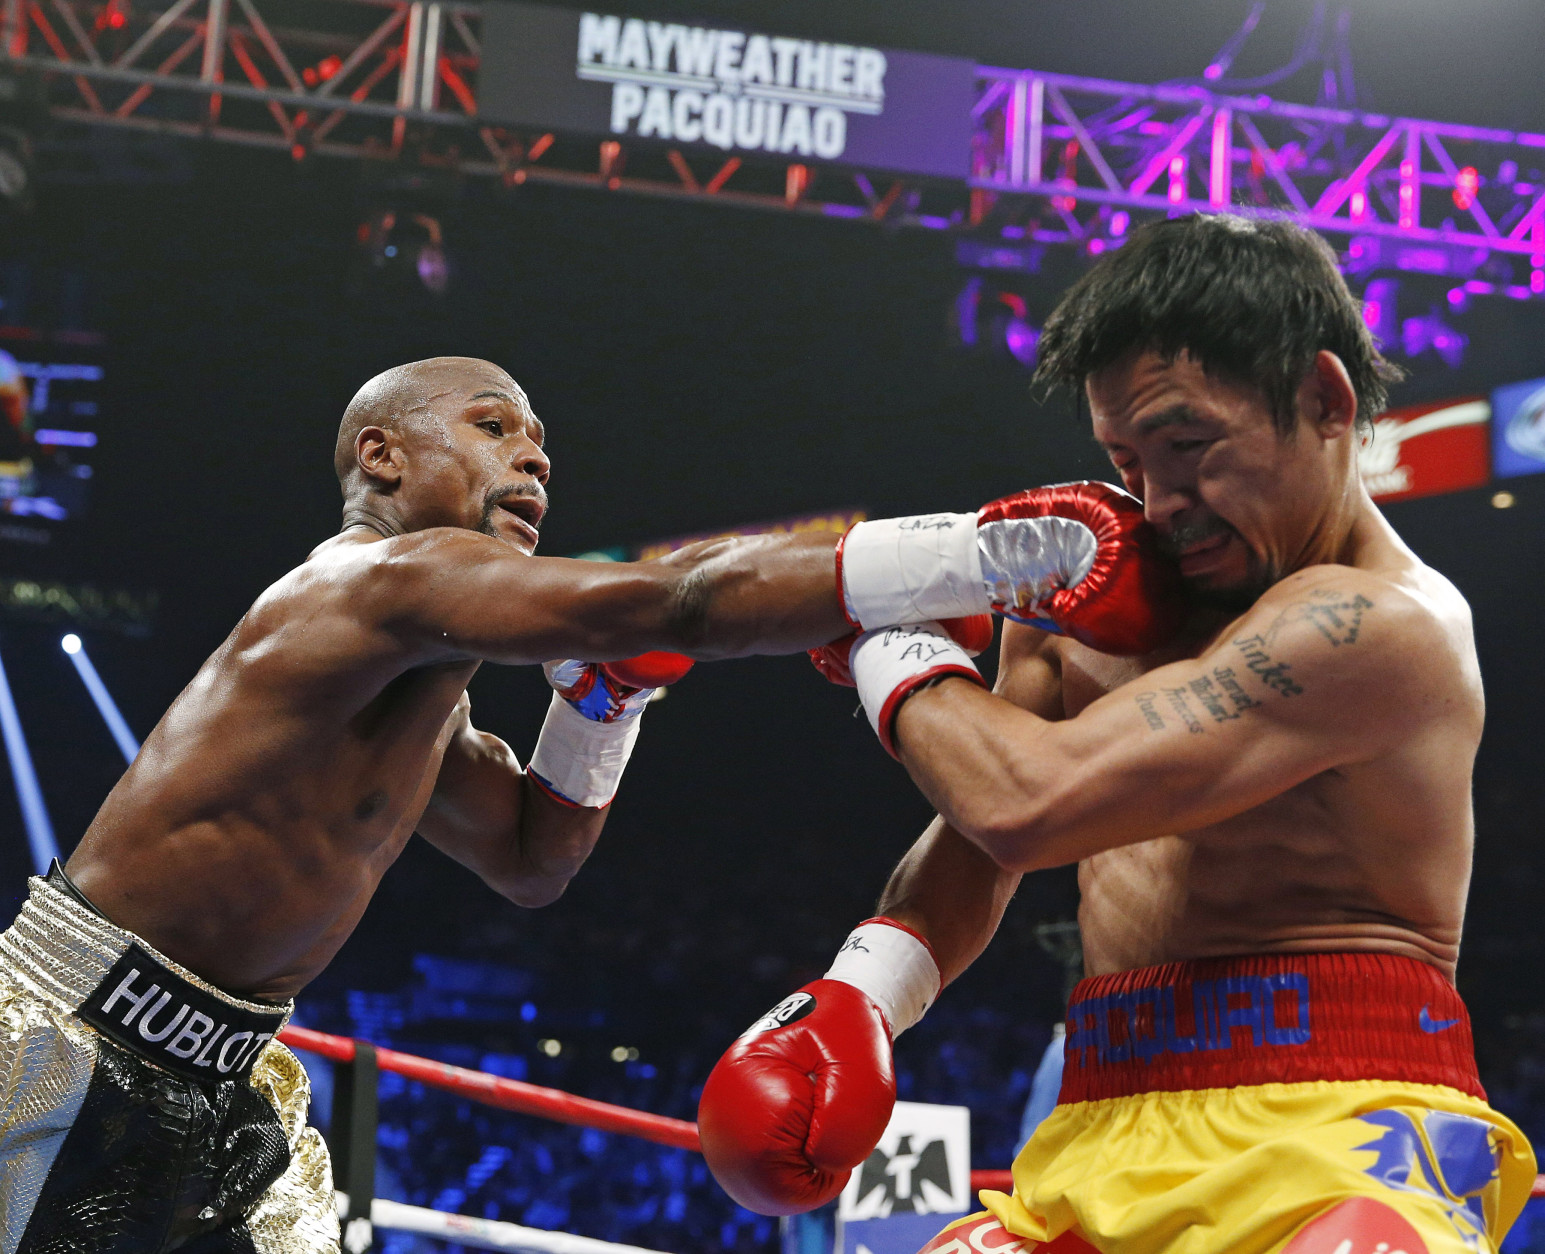 Floyd Mayweather Jr., left, connects with a right to the head of Manny Pacquiao, from the Philippines, during their welterweight title fight on Saturday, May 2, 2015 in Las Vegas. (AP Photo/John Locher, File)